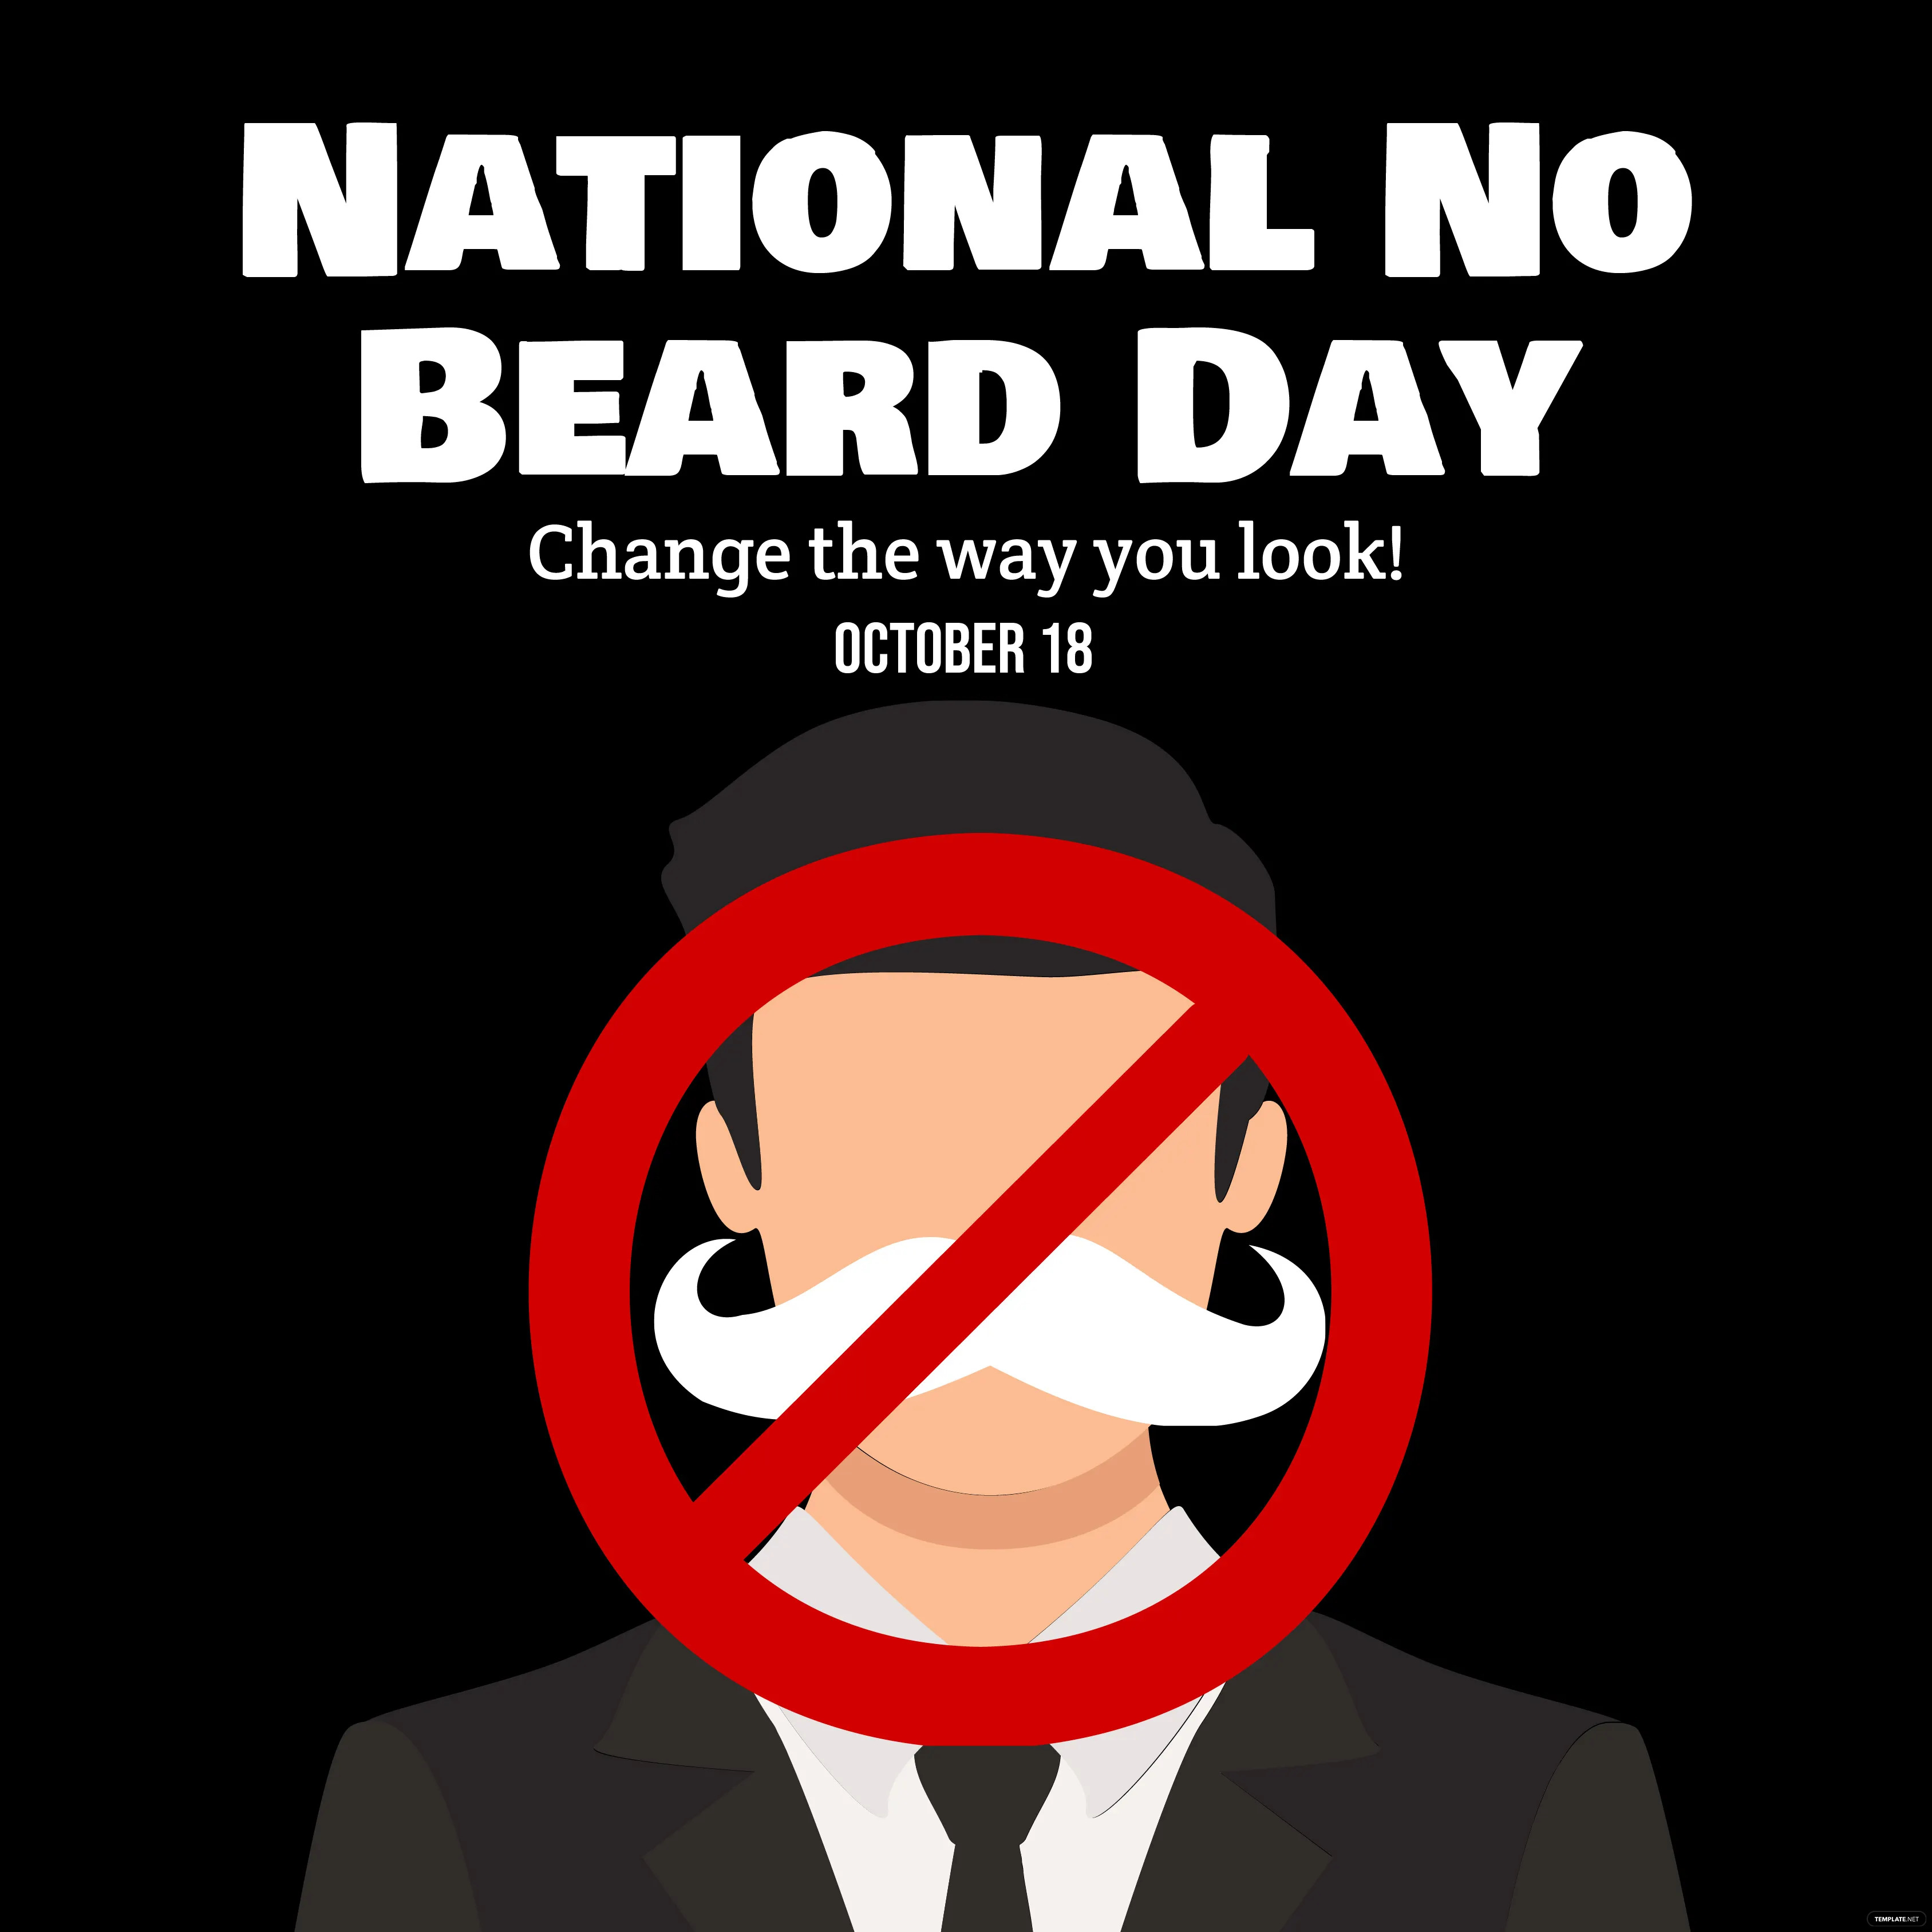 National No Beard Day When Is National No Beard Day? Meaning, Dates